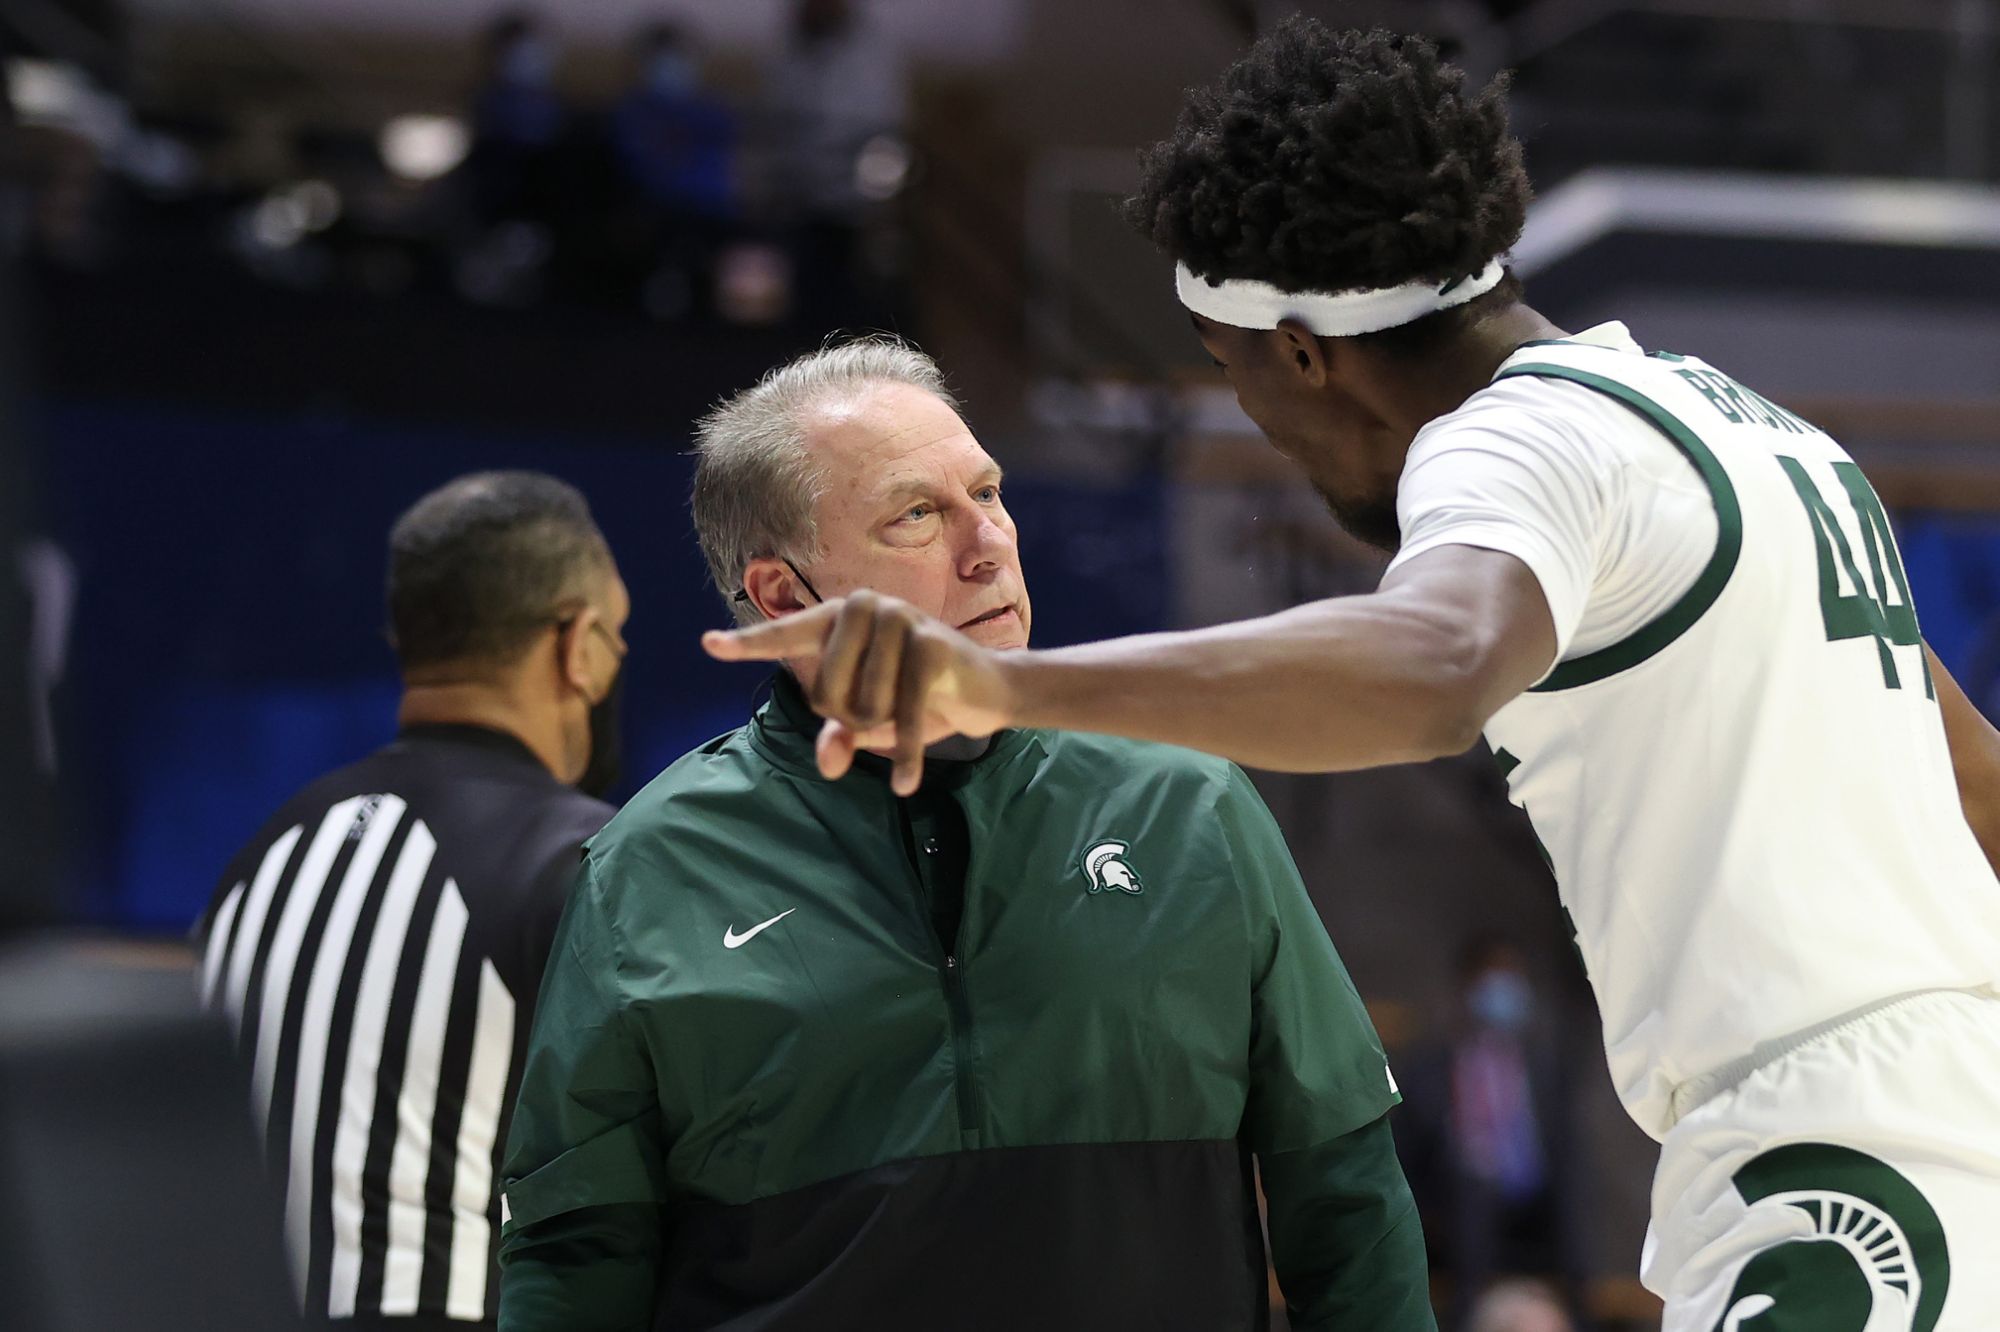 Basket Ball Player Gabe Brown Arguing With Tom Izzo